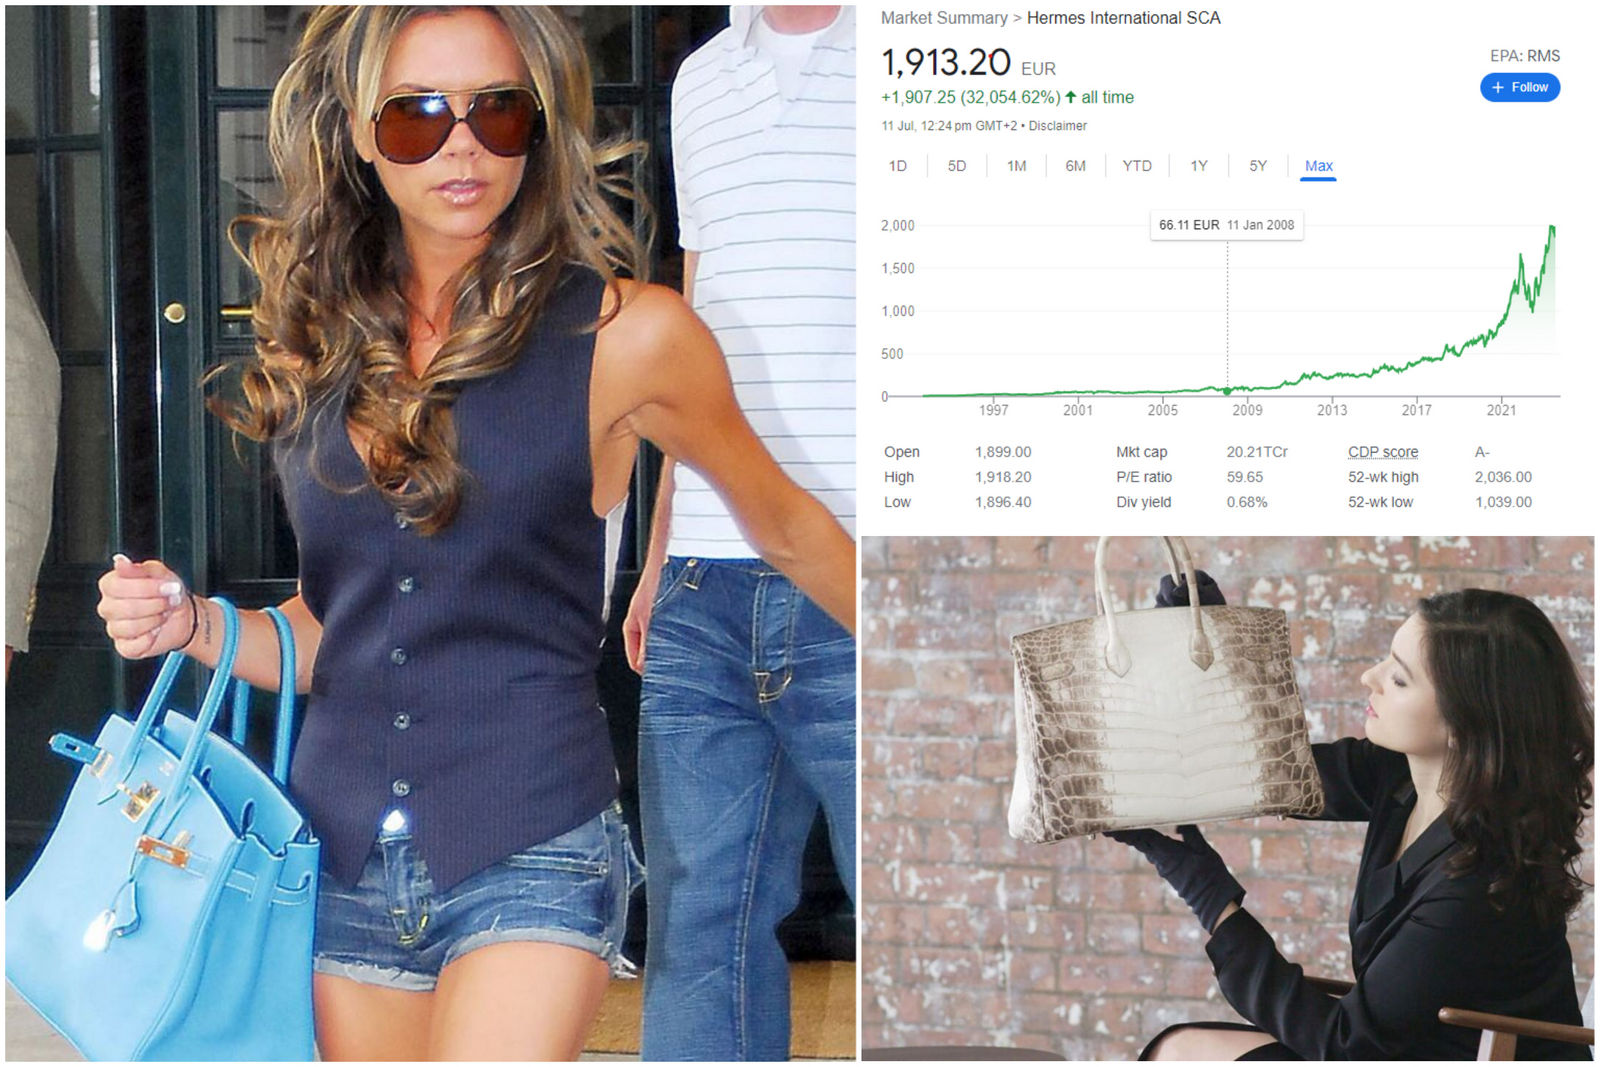 Victoria Beckham And Her Birkin Bag Obsession – From The Noughties To Now